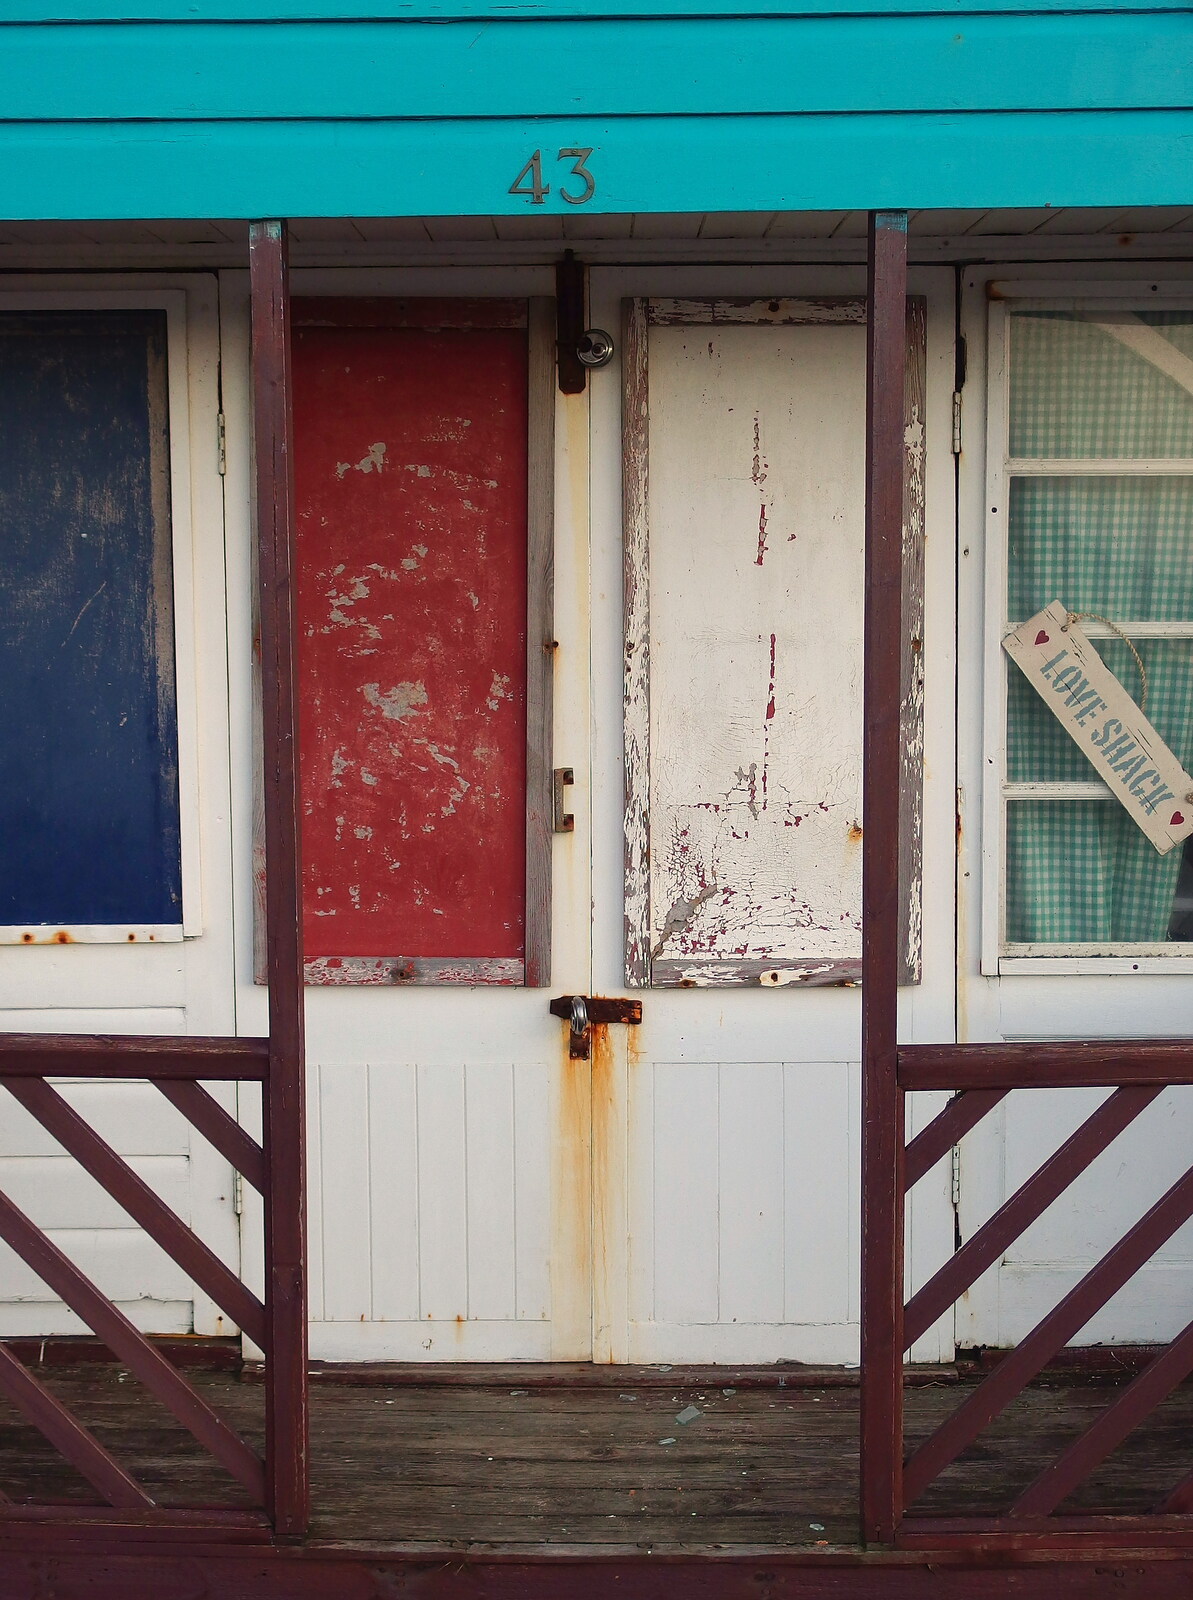 The decrepit splendour of the 'Love Shack' from Post-Christmas Southwold, Suffolk - 29th December 2013